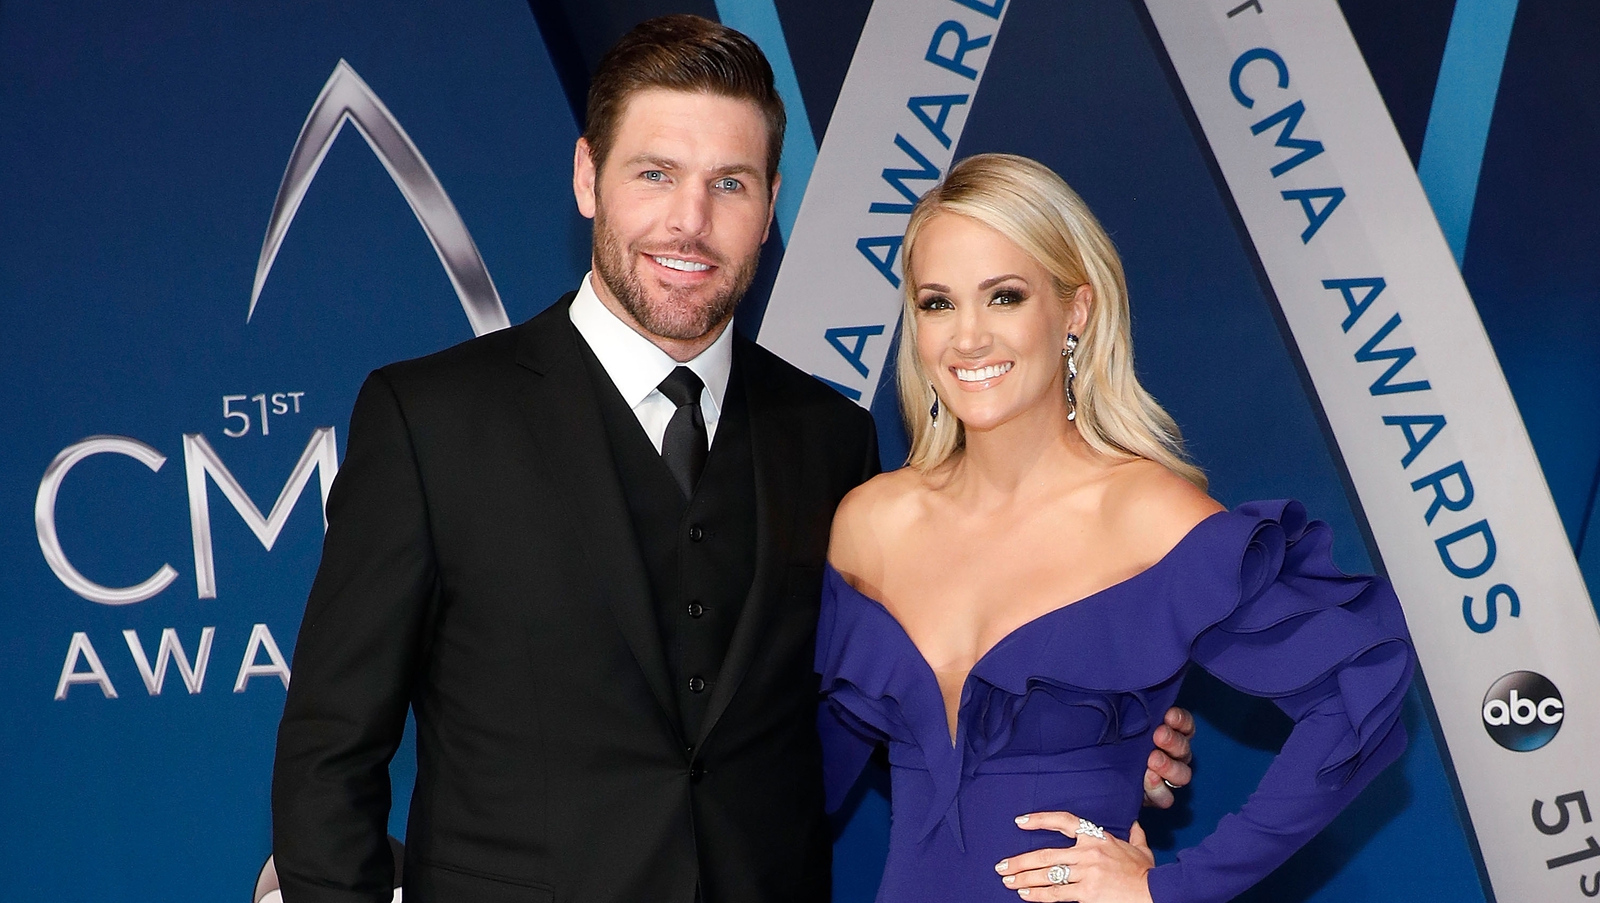 Carrie Underwood & Husband Welcome Baby Boy, Jacob Bryan Fisher